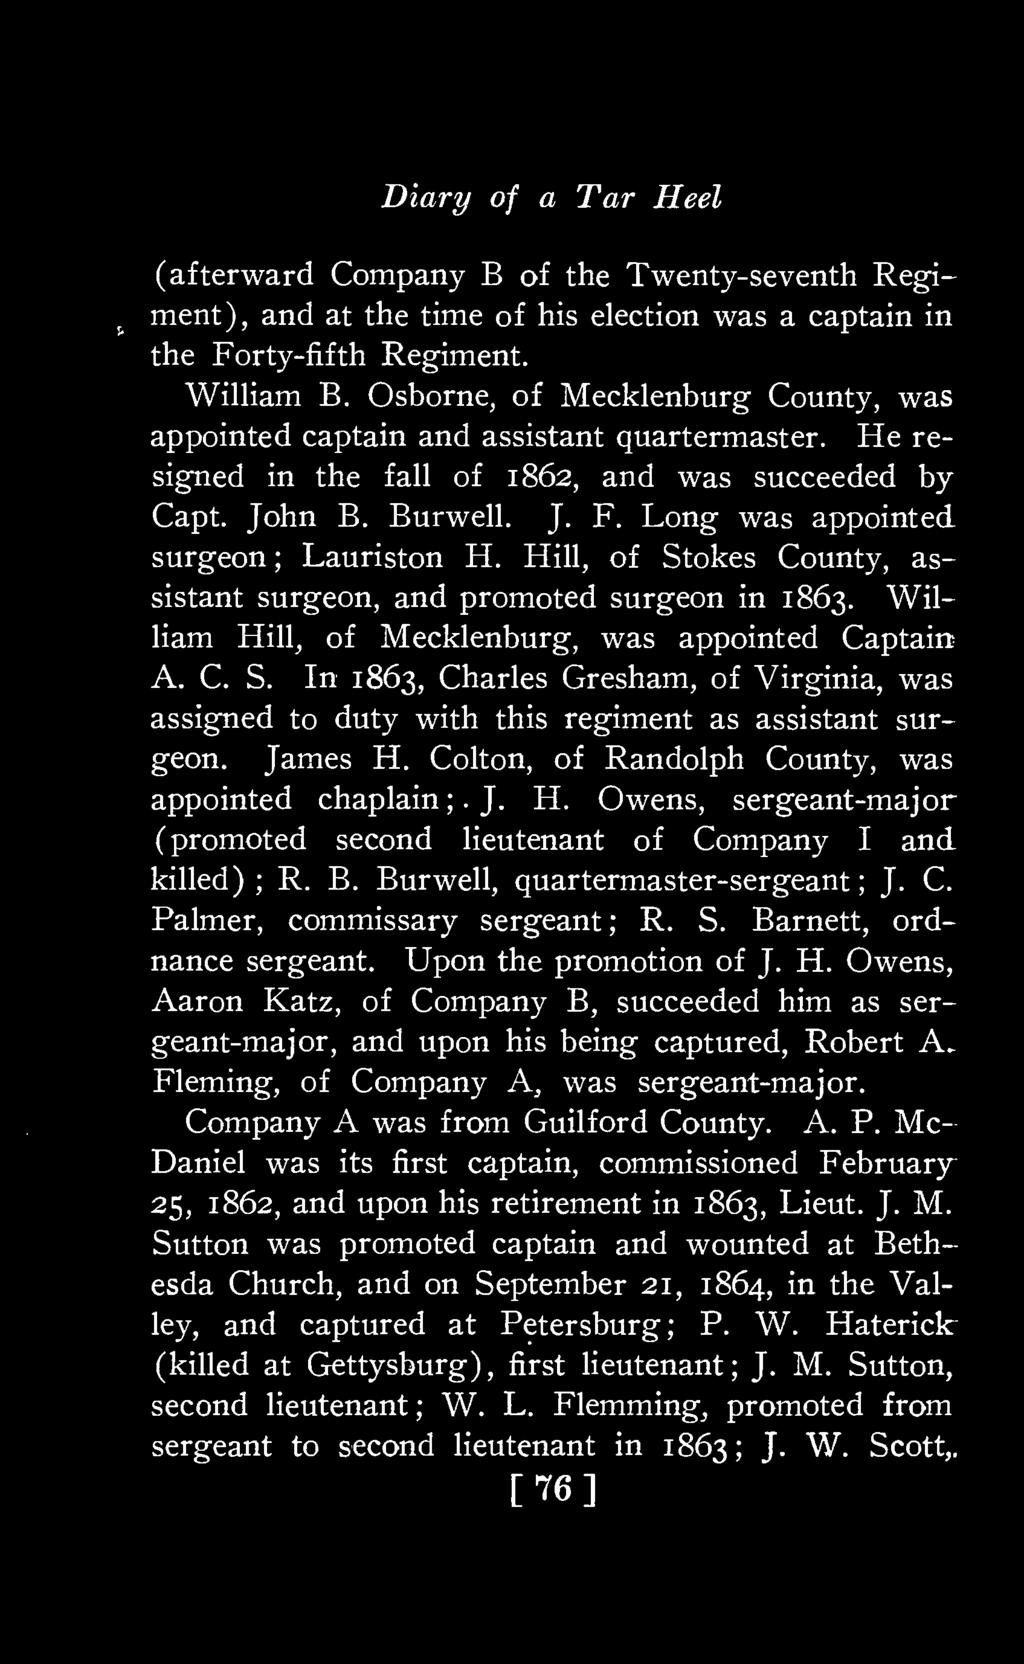 Long was appointed surgeon; Lauriston H. Hill, of Stokes County, assistant surgeon, and promoted surgeon in 1863. William Hill, of Mecklenburg, was appointed Captain A. C. S. In 1863, Charles Gresham, of Virginia, was assigned to duty with this regiment as assistant surgeon.